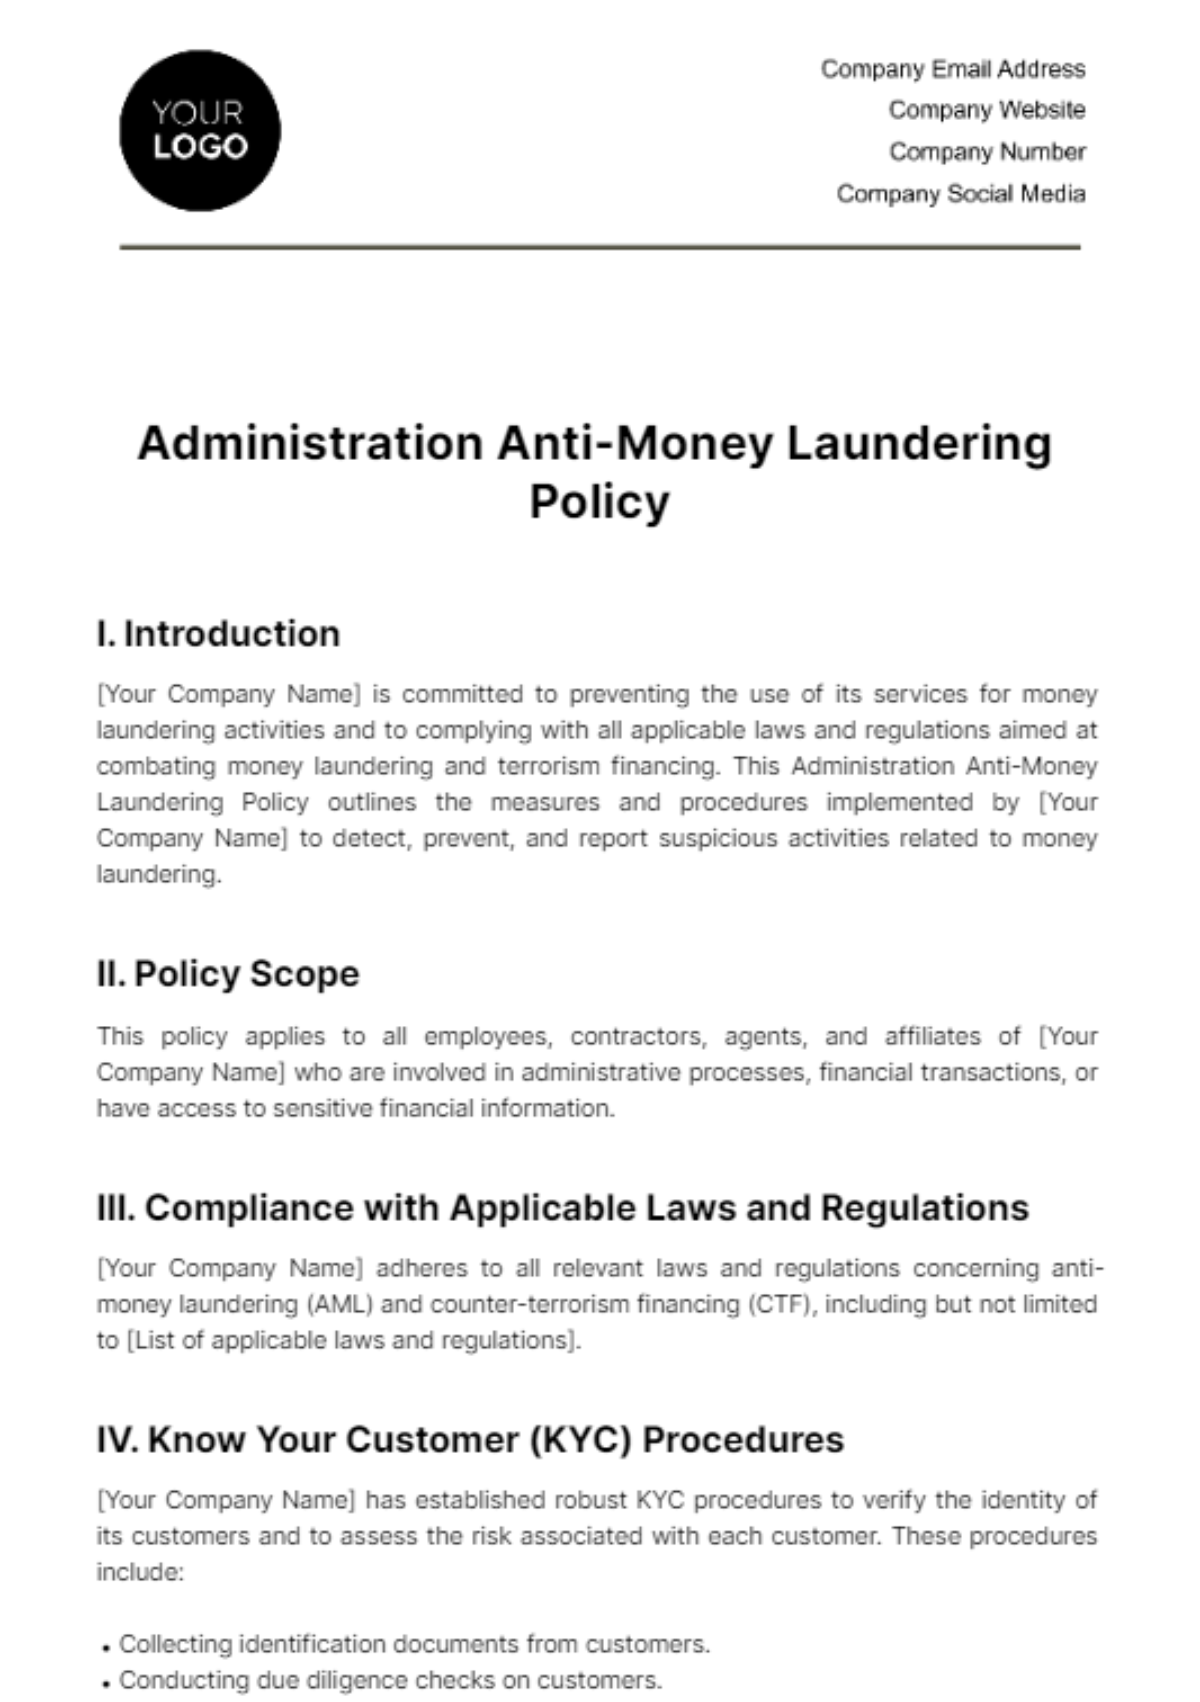 Administration Anti-Money Laundering Policy Template